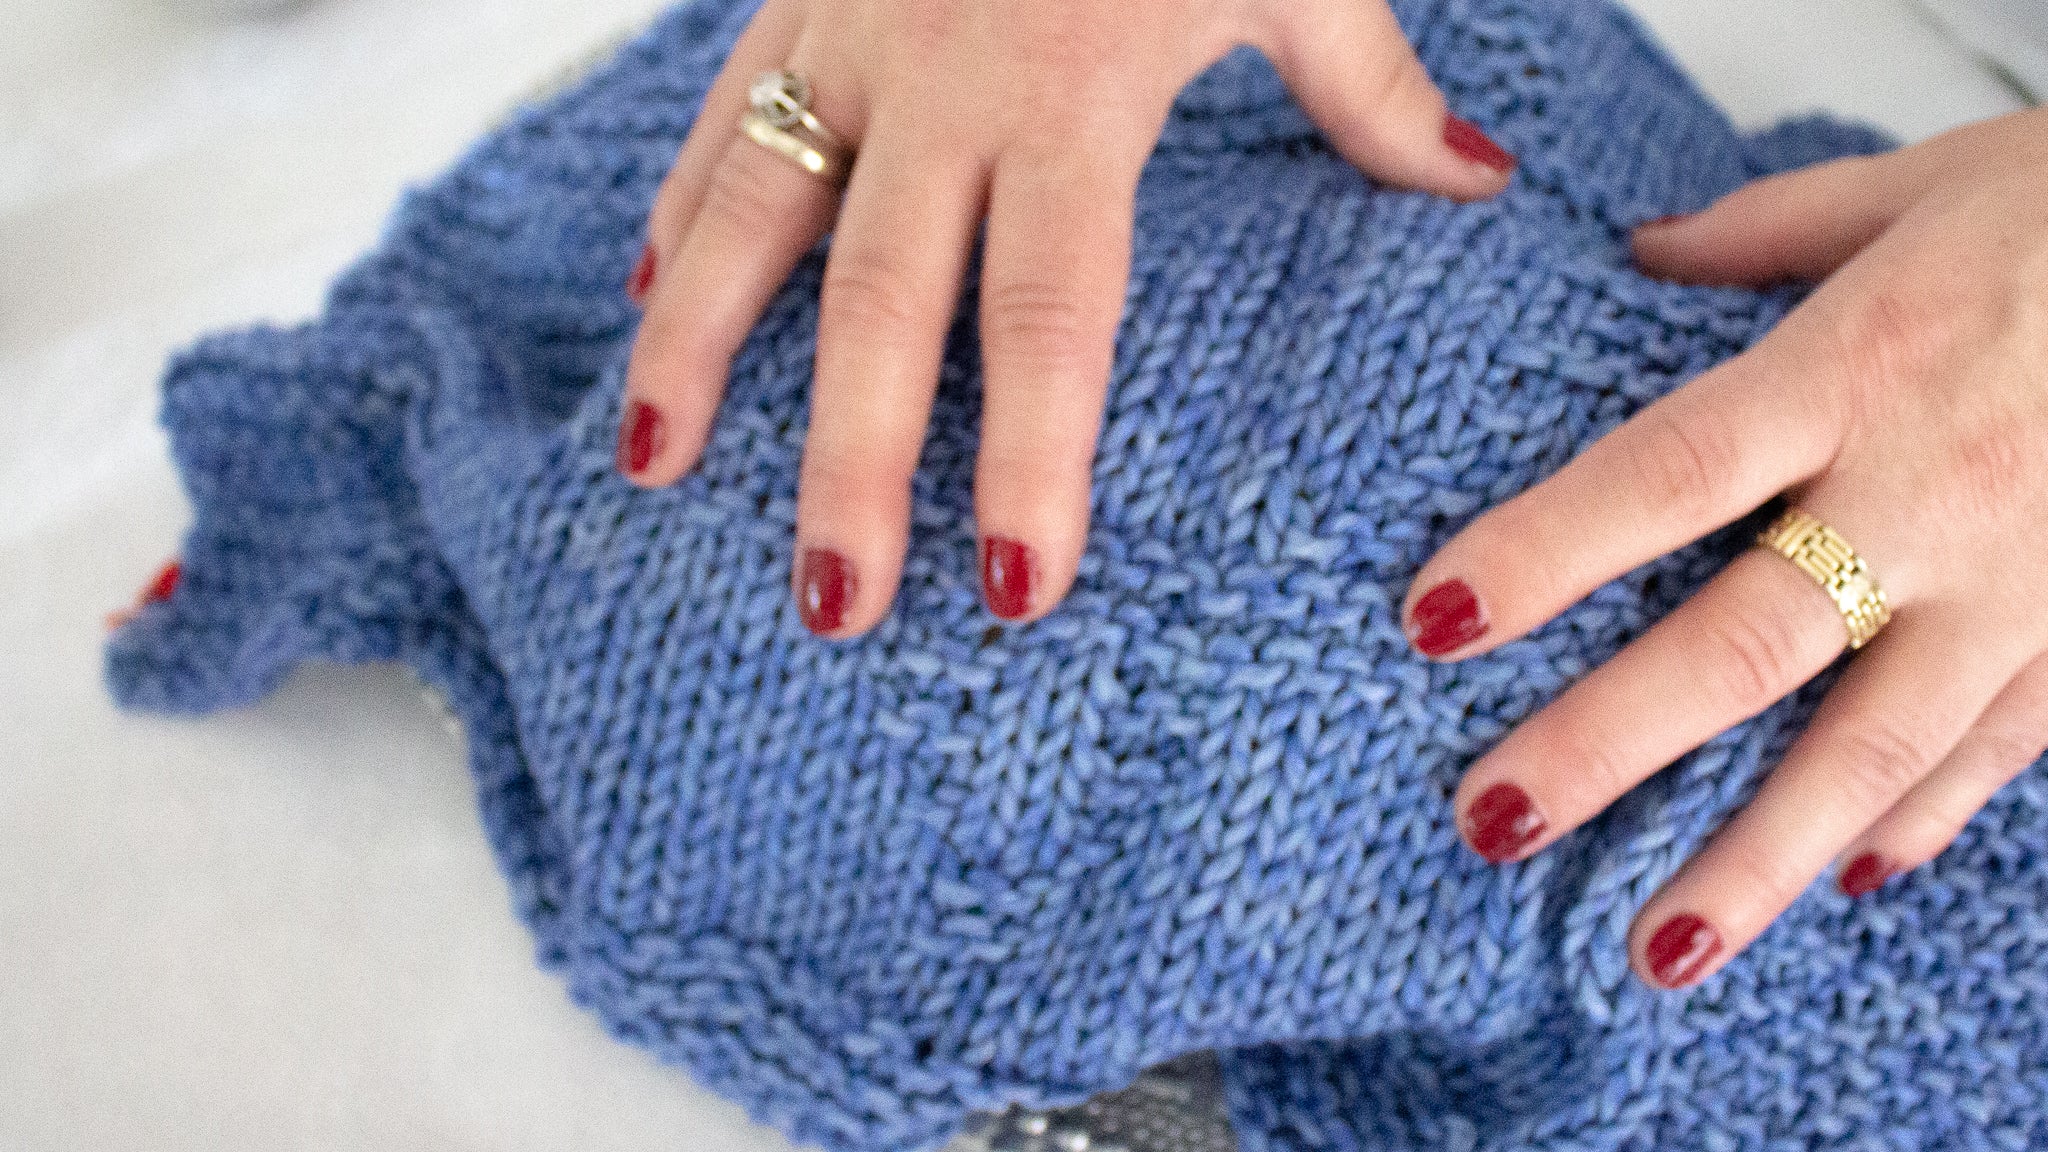 Woman with red pained nails with her hands placed on the blue Magen David challah cover, covering challah.